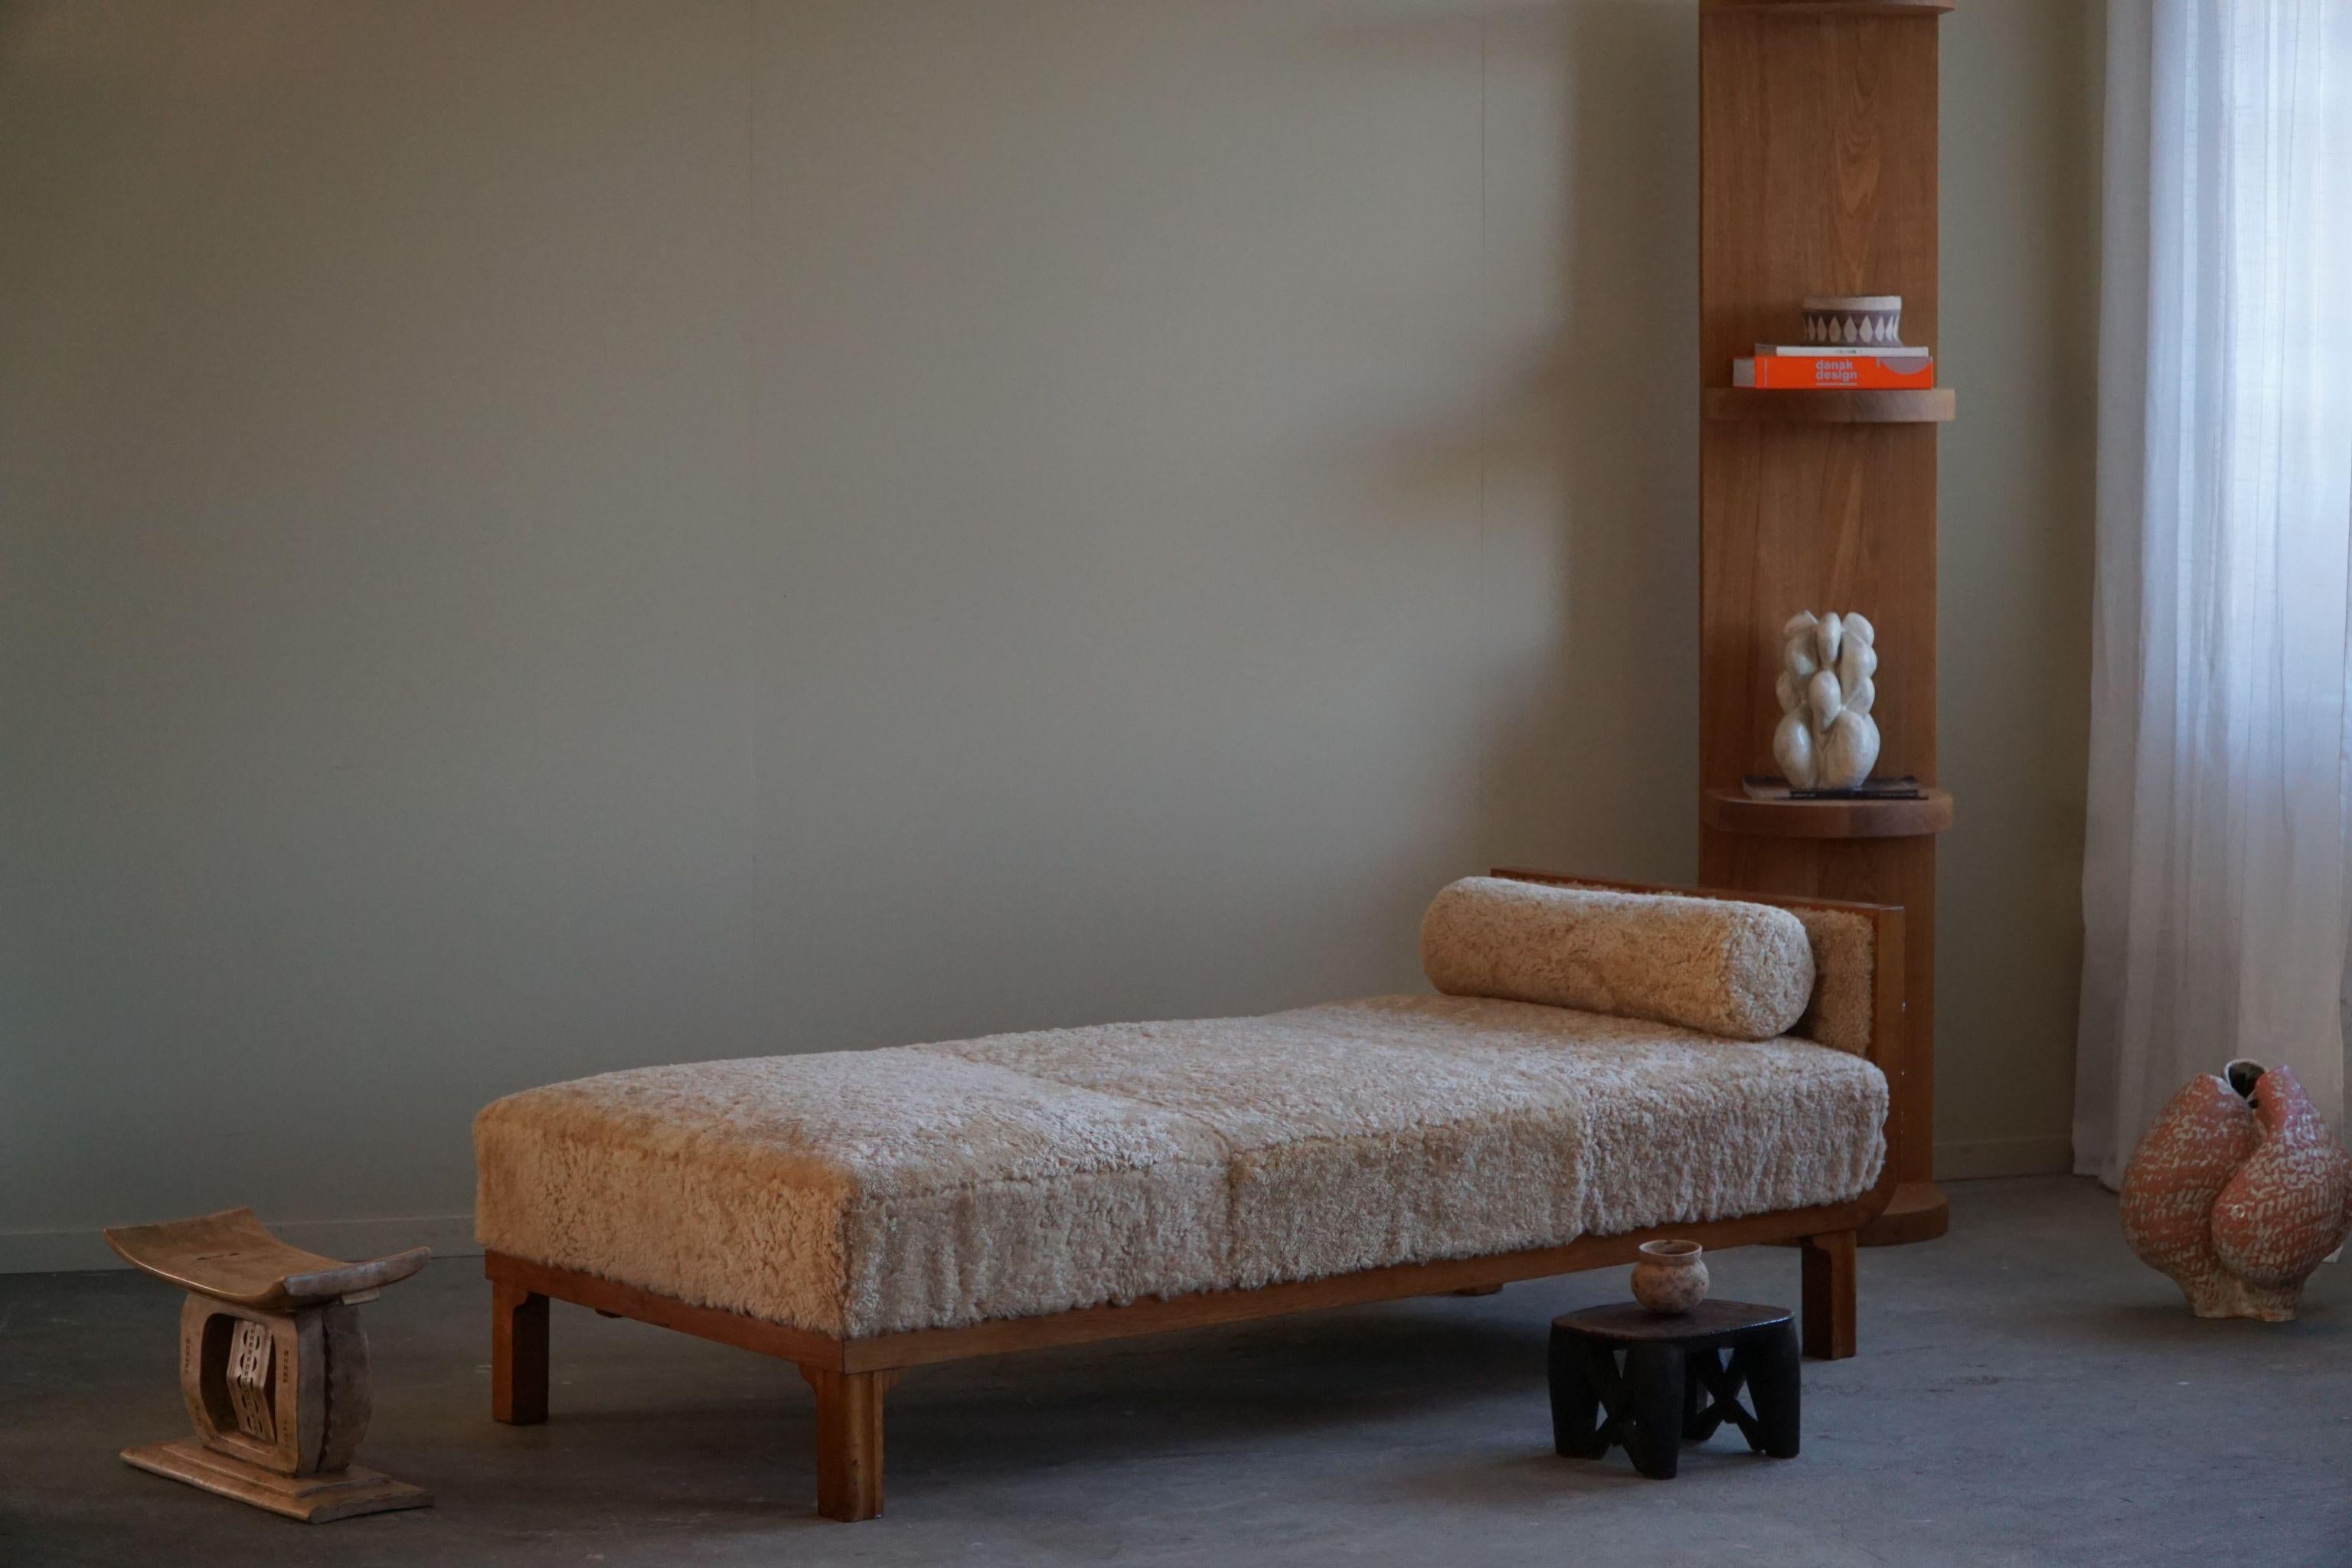 Immerse yourself in the elegance of mid-century design with this Art Deco daybed, expertly reupholstered in great quality lambswool. Crafted in the 1940s by a skilled Danish cabinetmaker, its oak frame boasts the clean lines characteristic of the